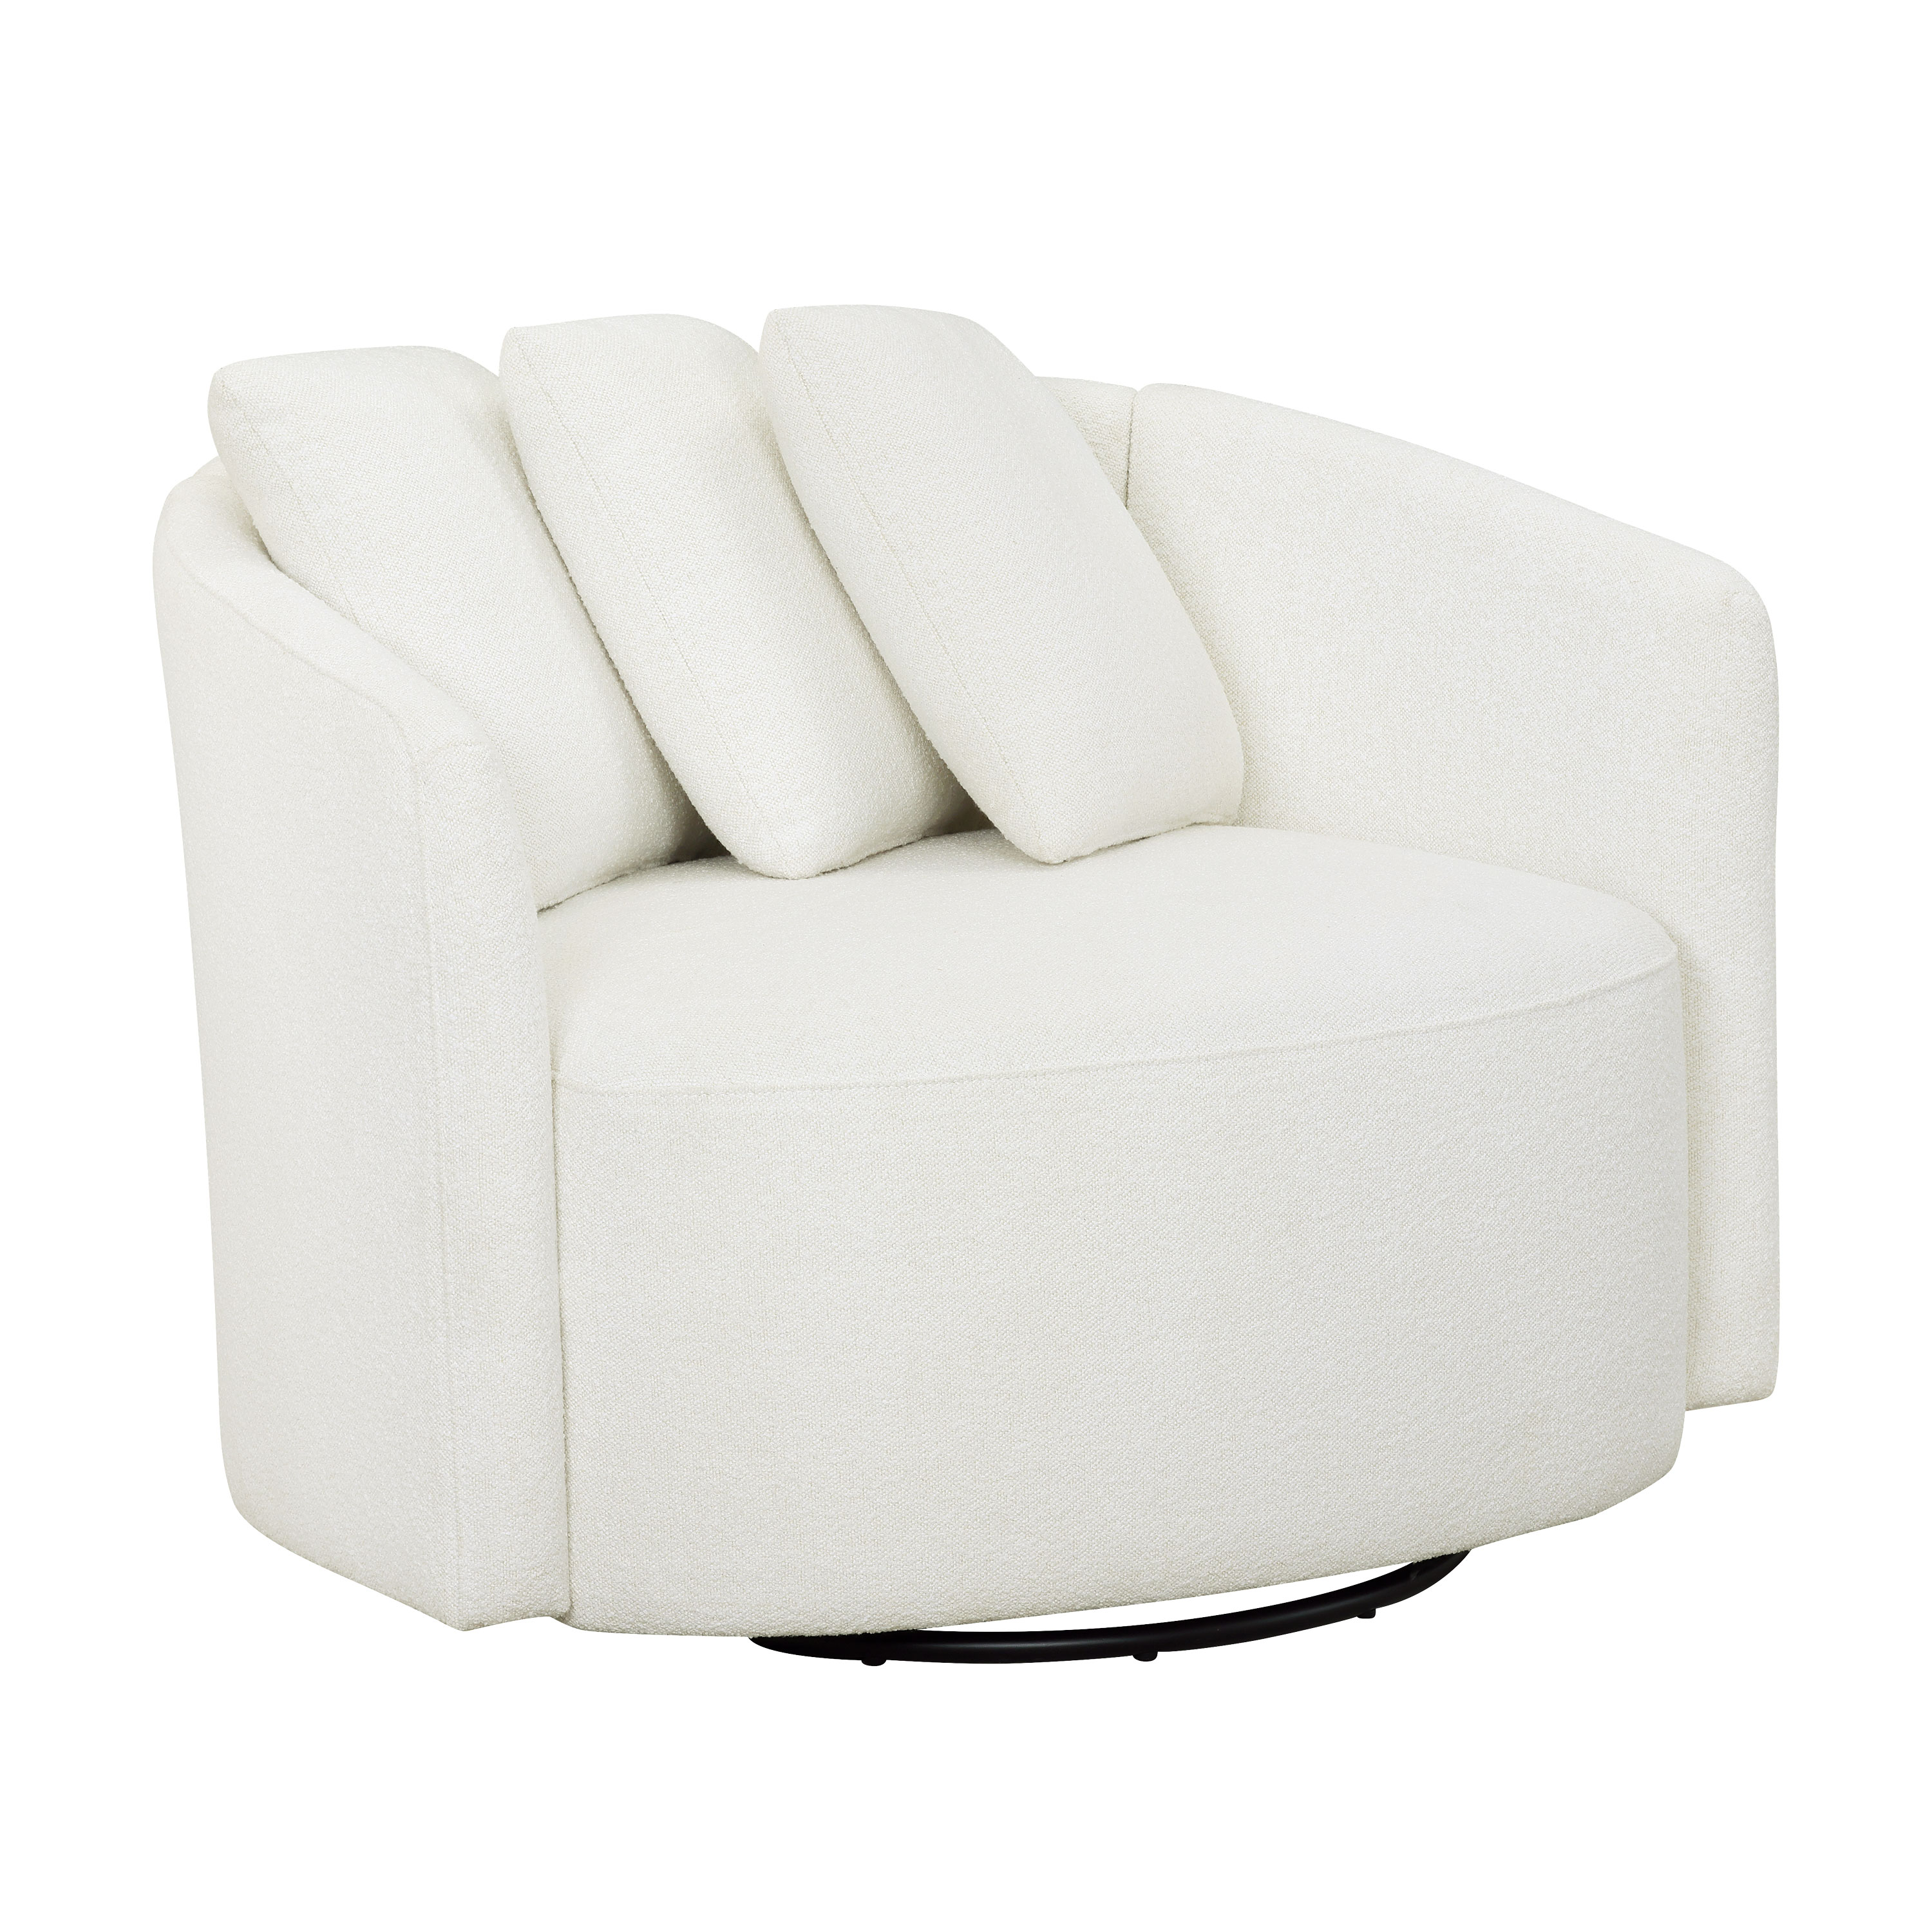 Beautiful Drew Chair by Drew Barrymore, Cream - image 6 of 11